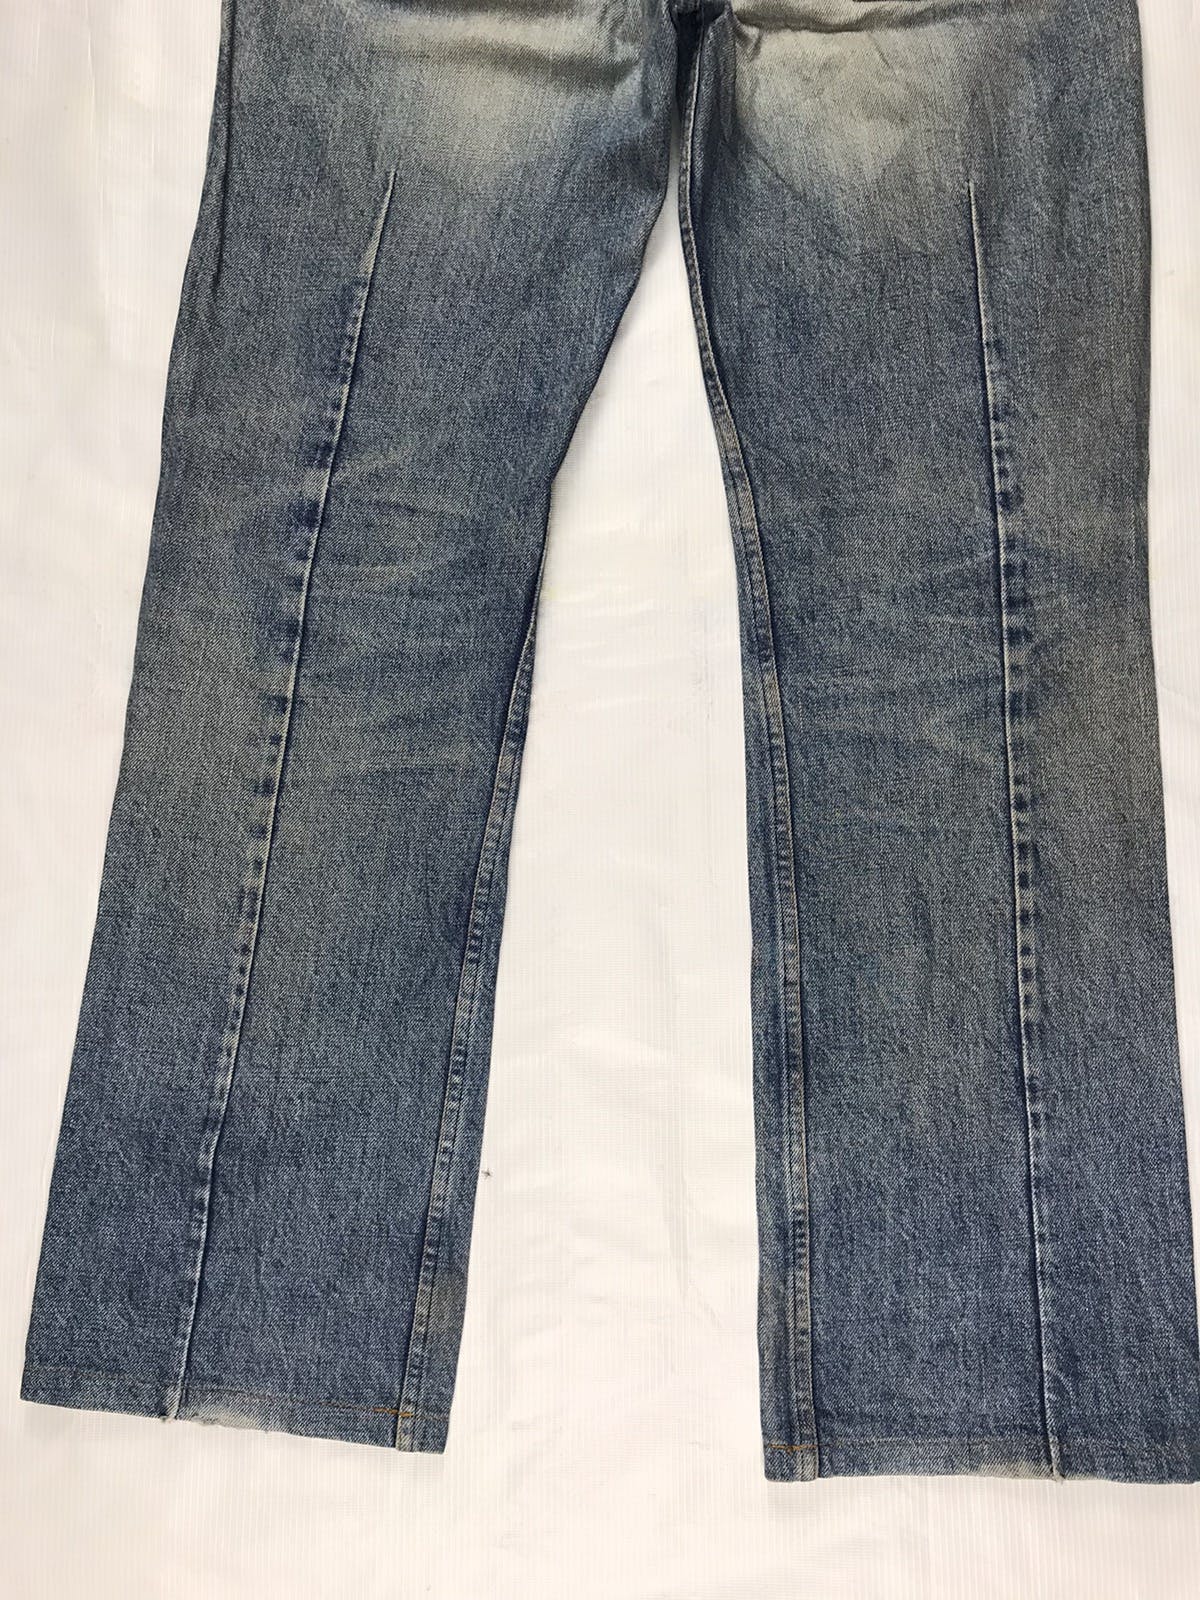 Rare!! A.P.C patch pocket distressed denim Made in Japan - 13